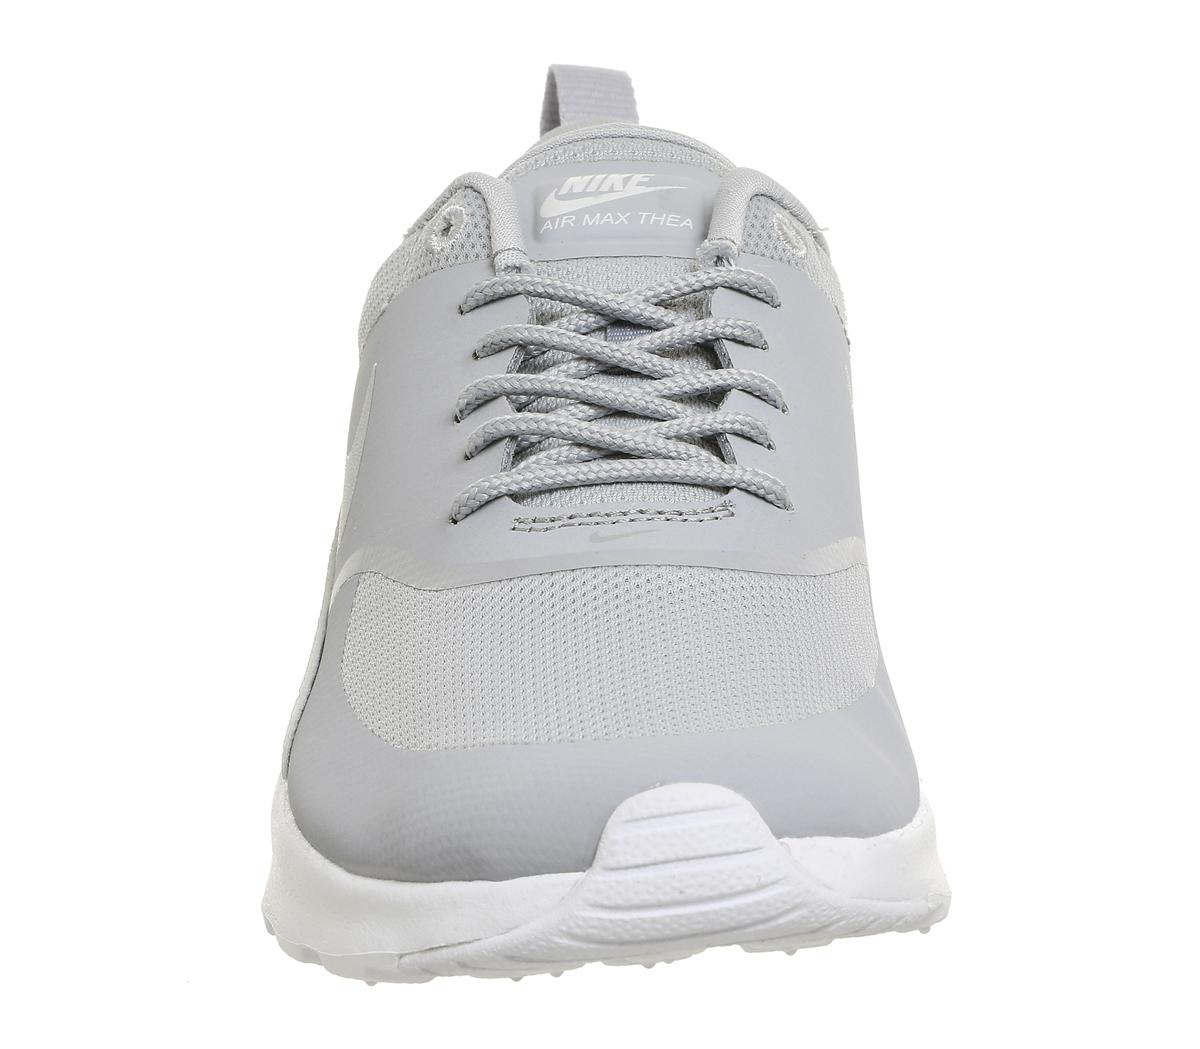 Nike Synthetic Air Max Thea Trainers in Grey (Gray) | Lyst